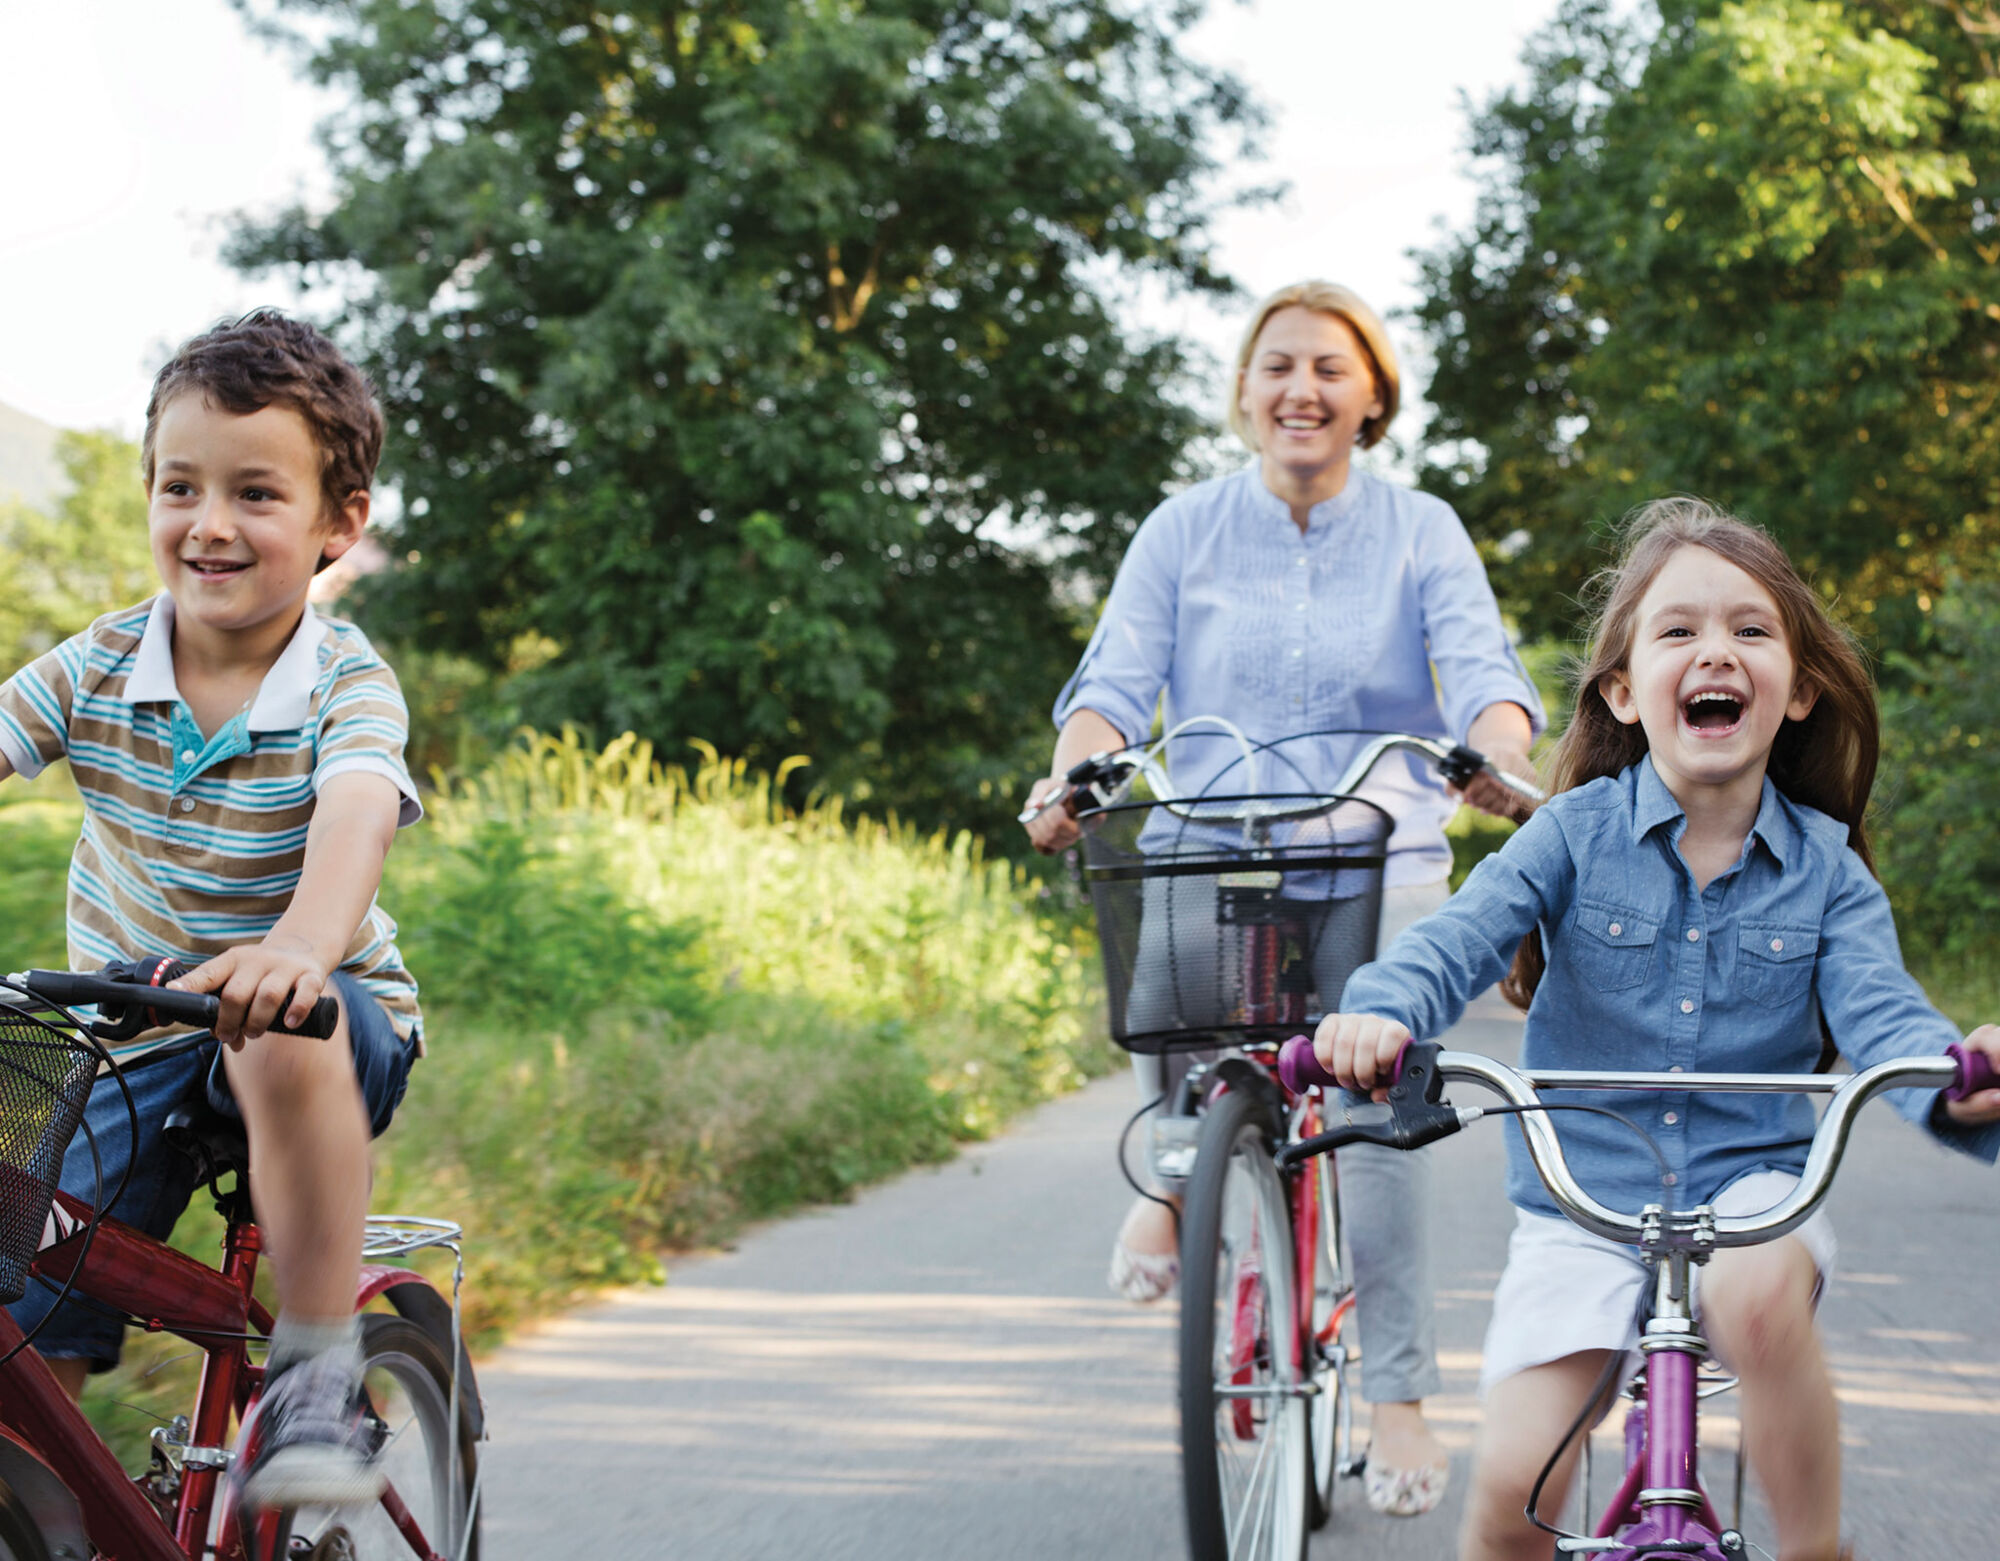 Two children ride bikes down a path surrounded by grass and trees while their mother follows behind on a bike.